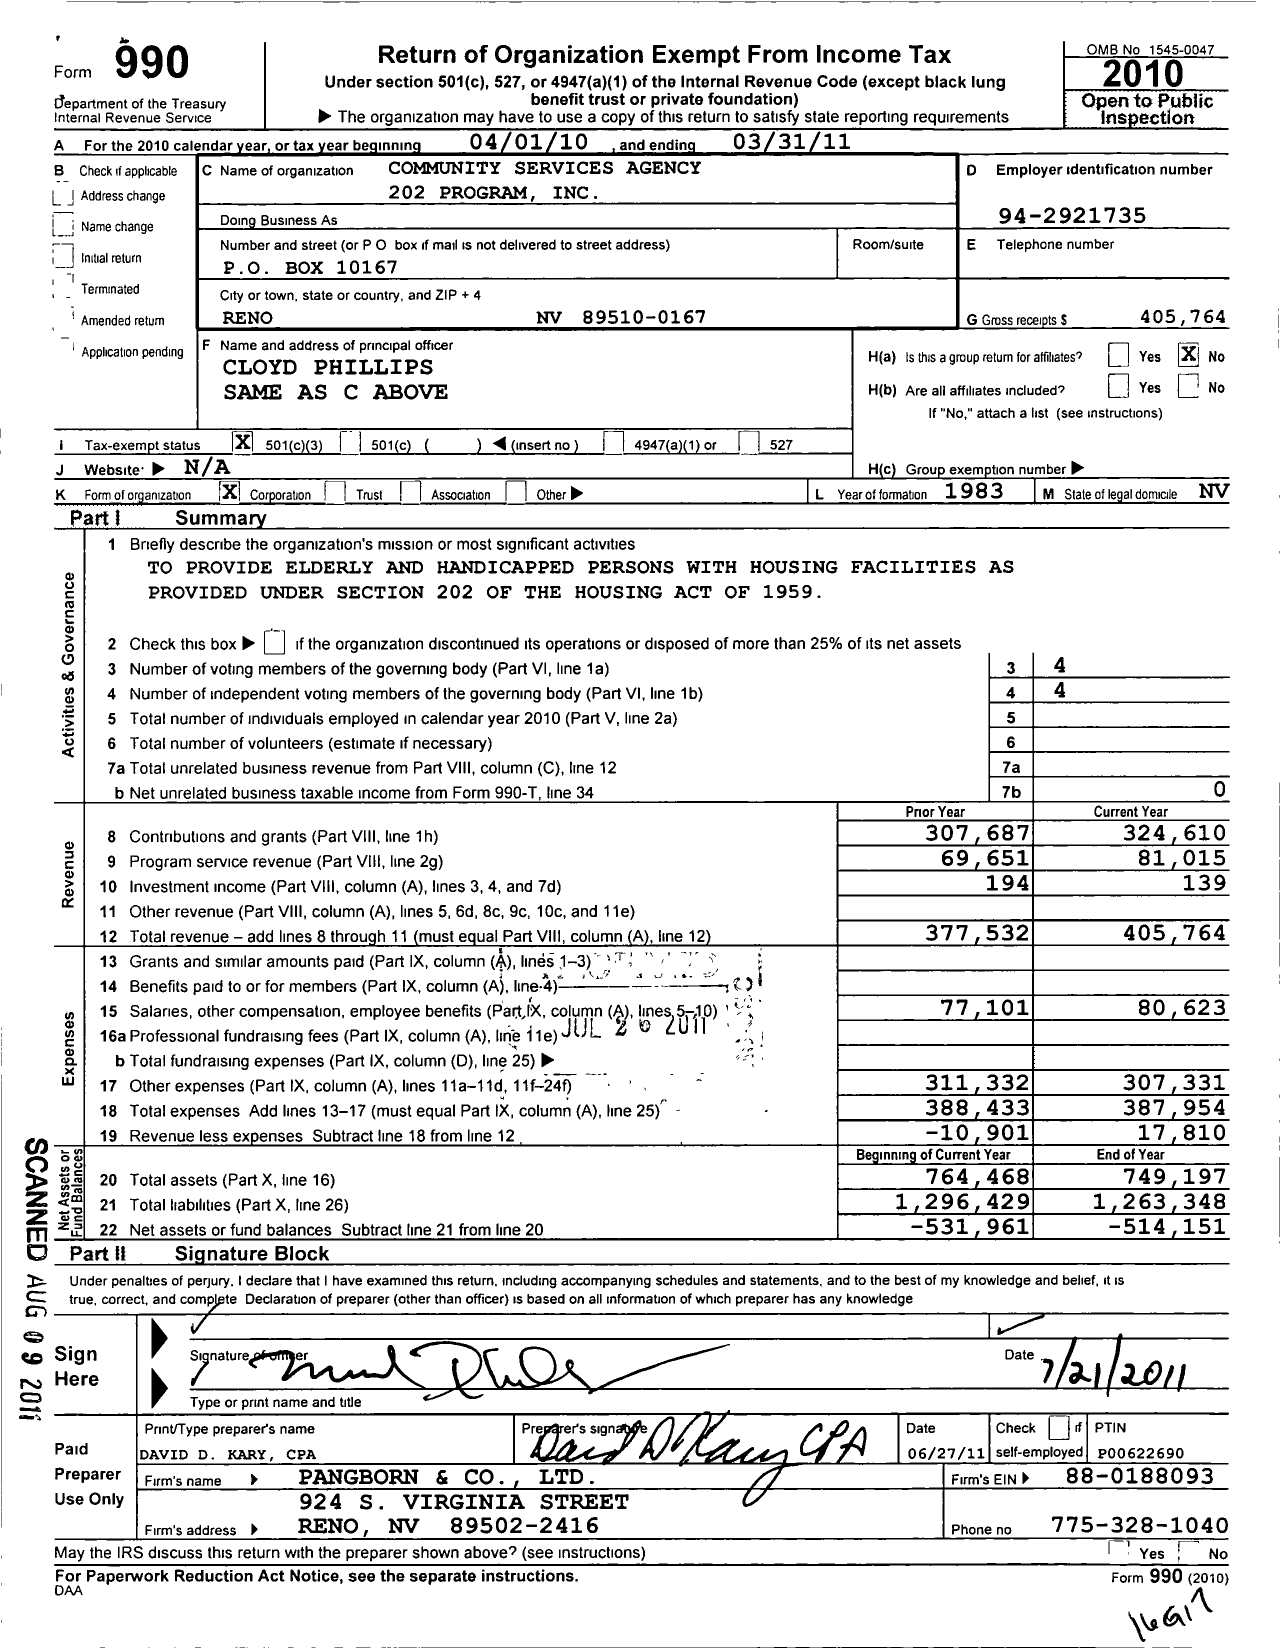 Image of first page of 2010 Form 990 for Community Services Agency 202 Program